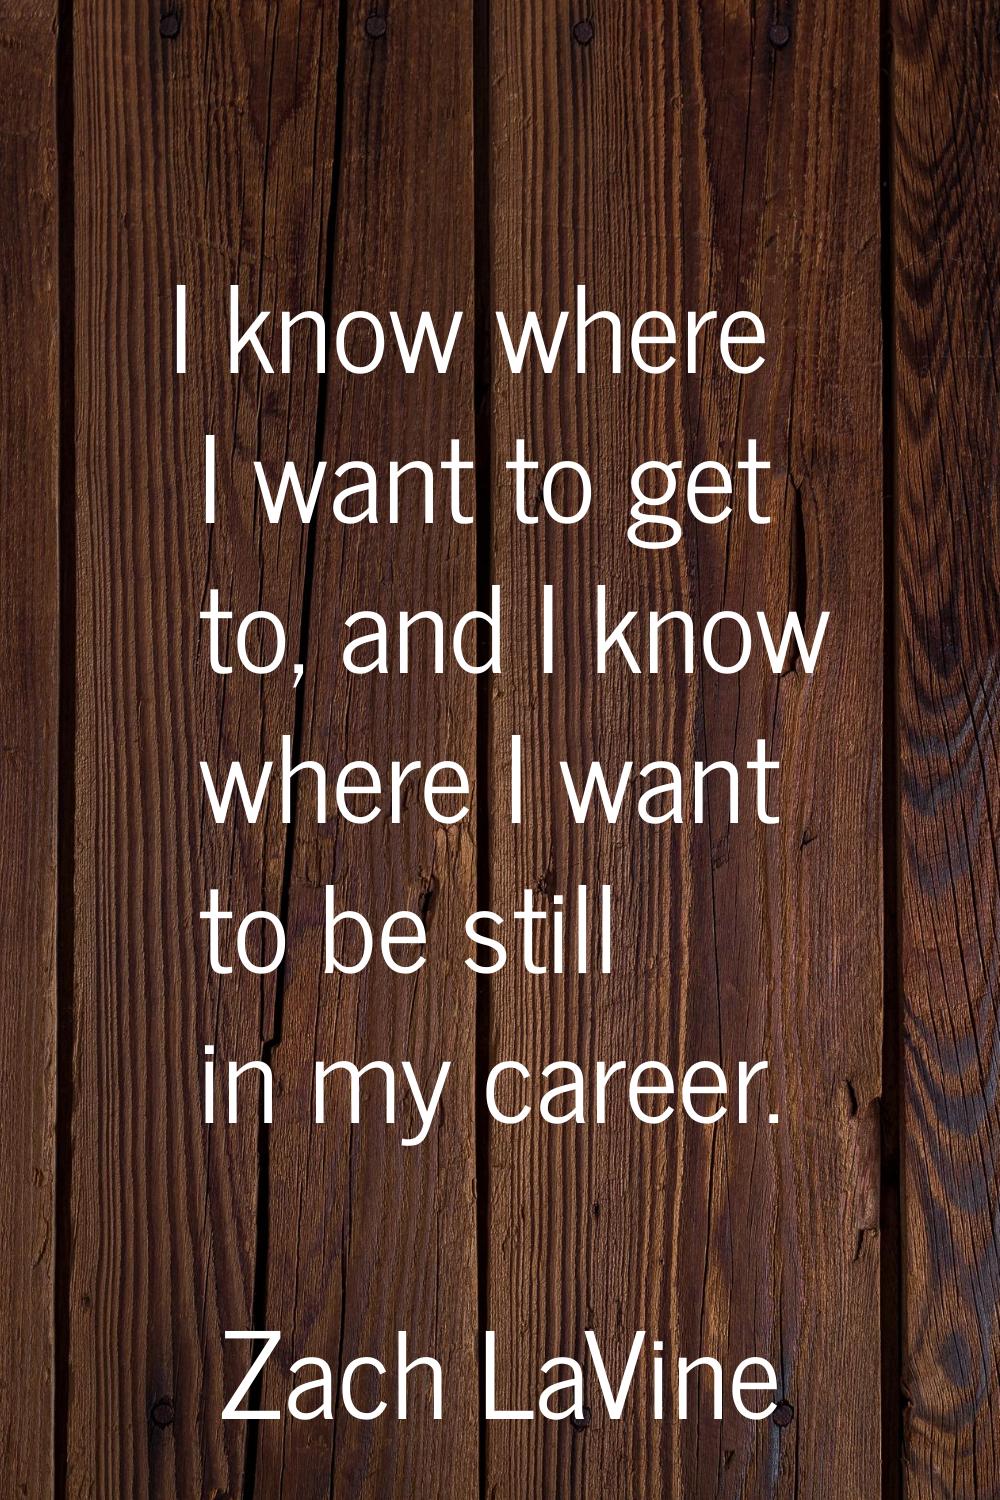 I know where I want to get to, and I know where I want to be still in my career.